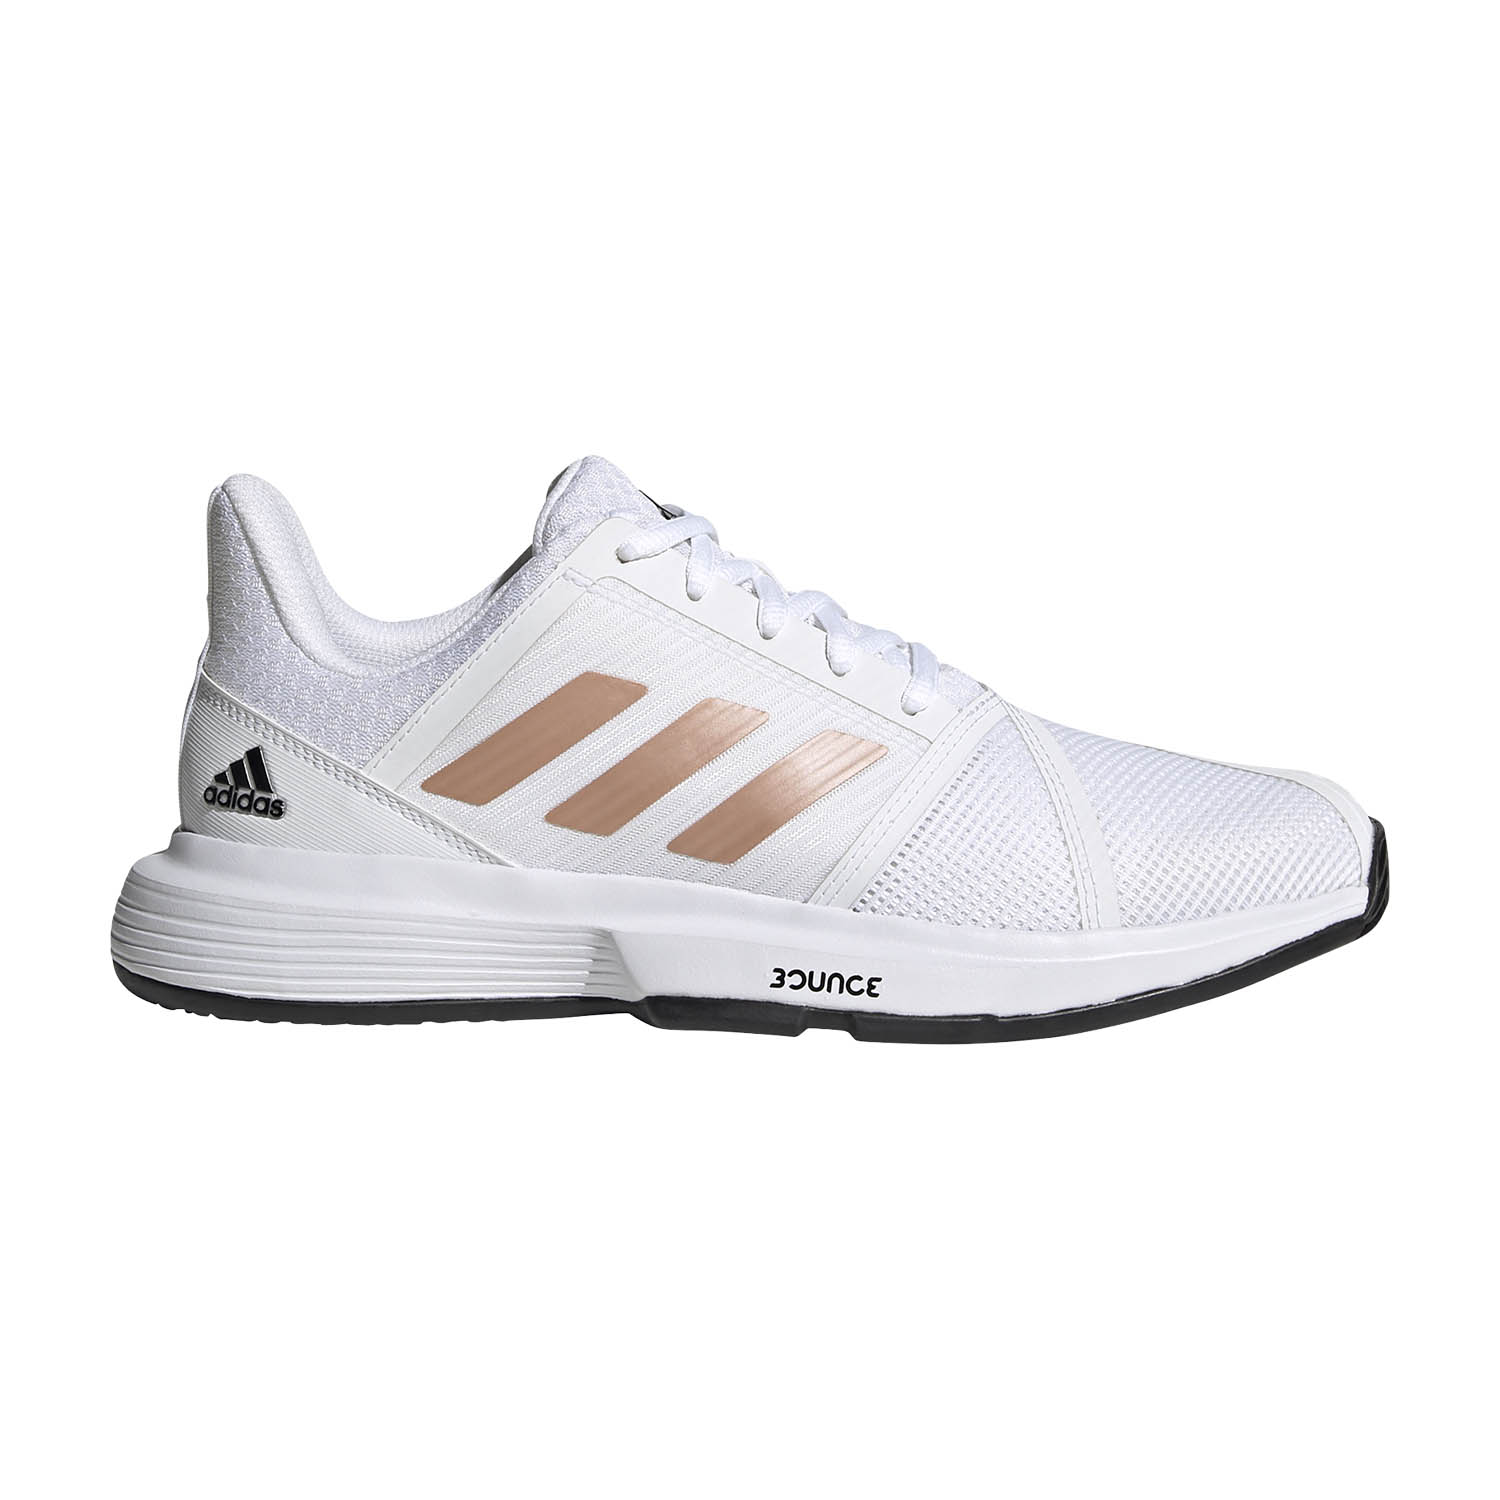 adidas CourtJam Bounce Zapatillas Tenis Mujer - Ftwr White